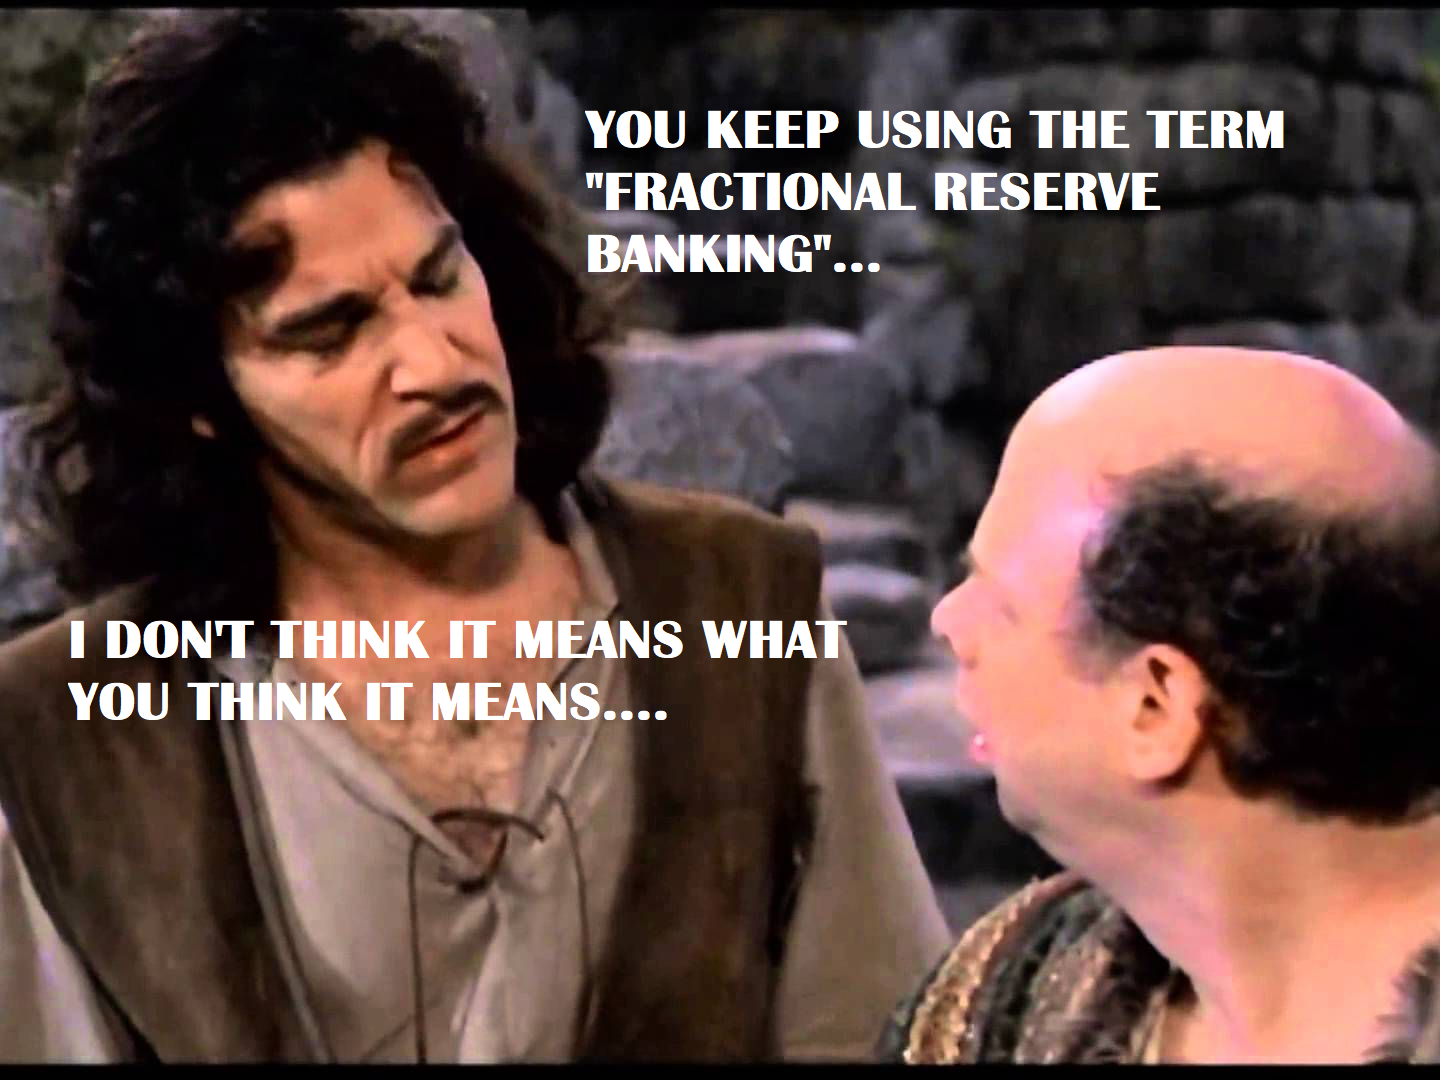 What is “Fractional Reserve Banking”?